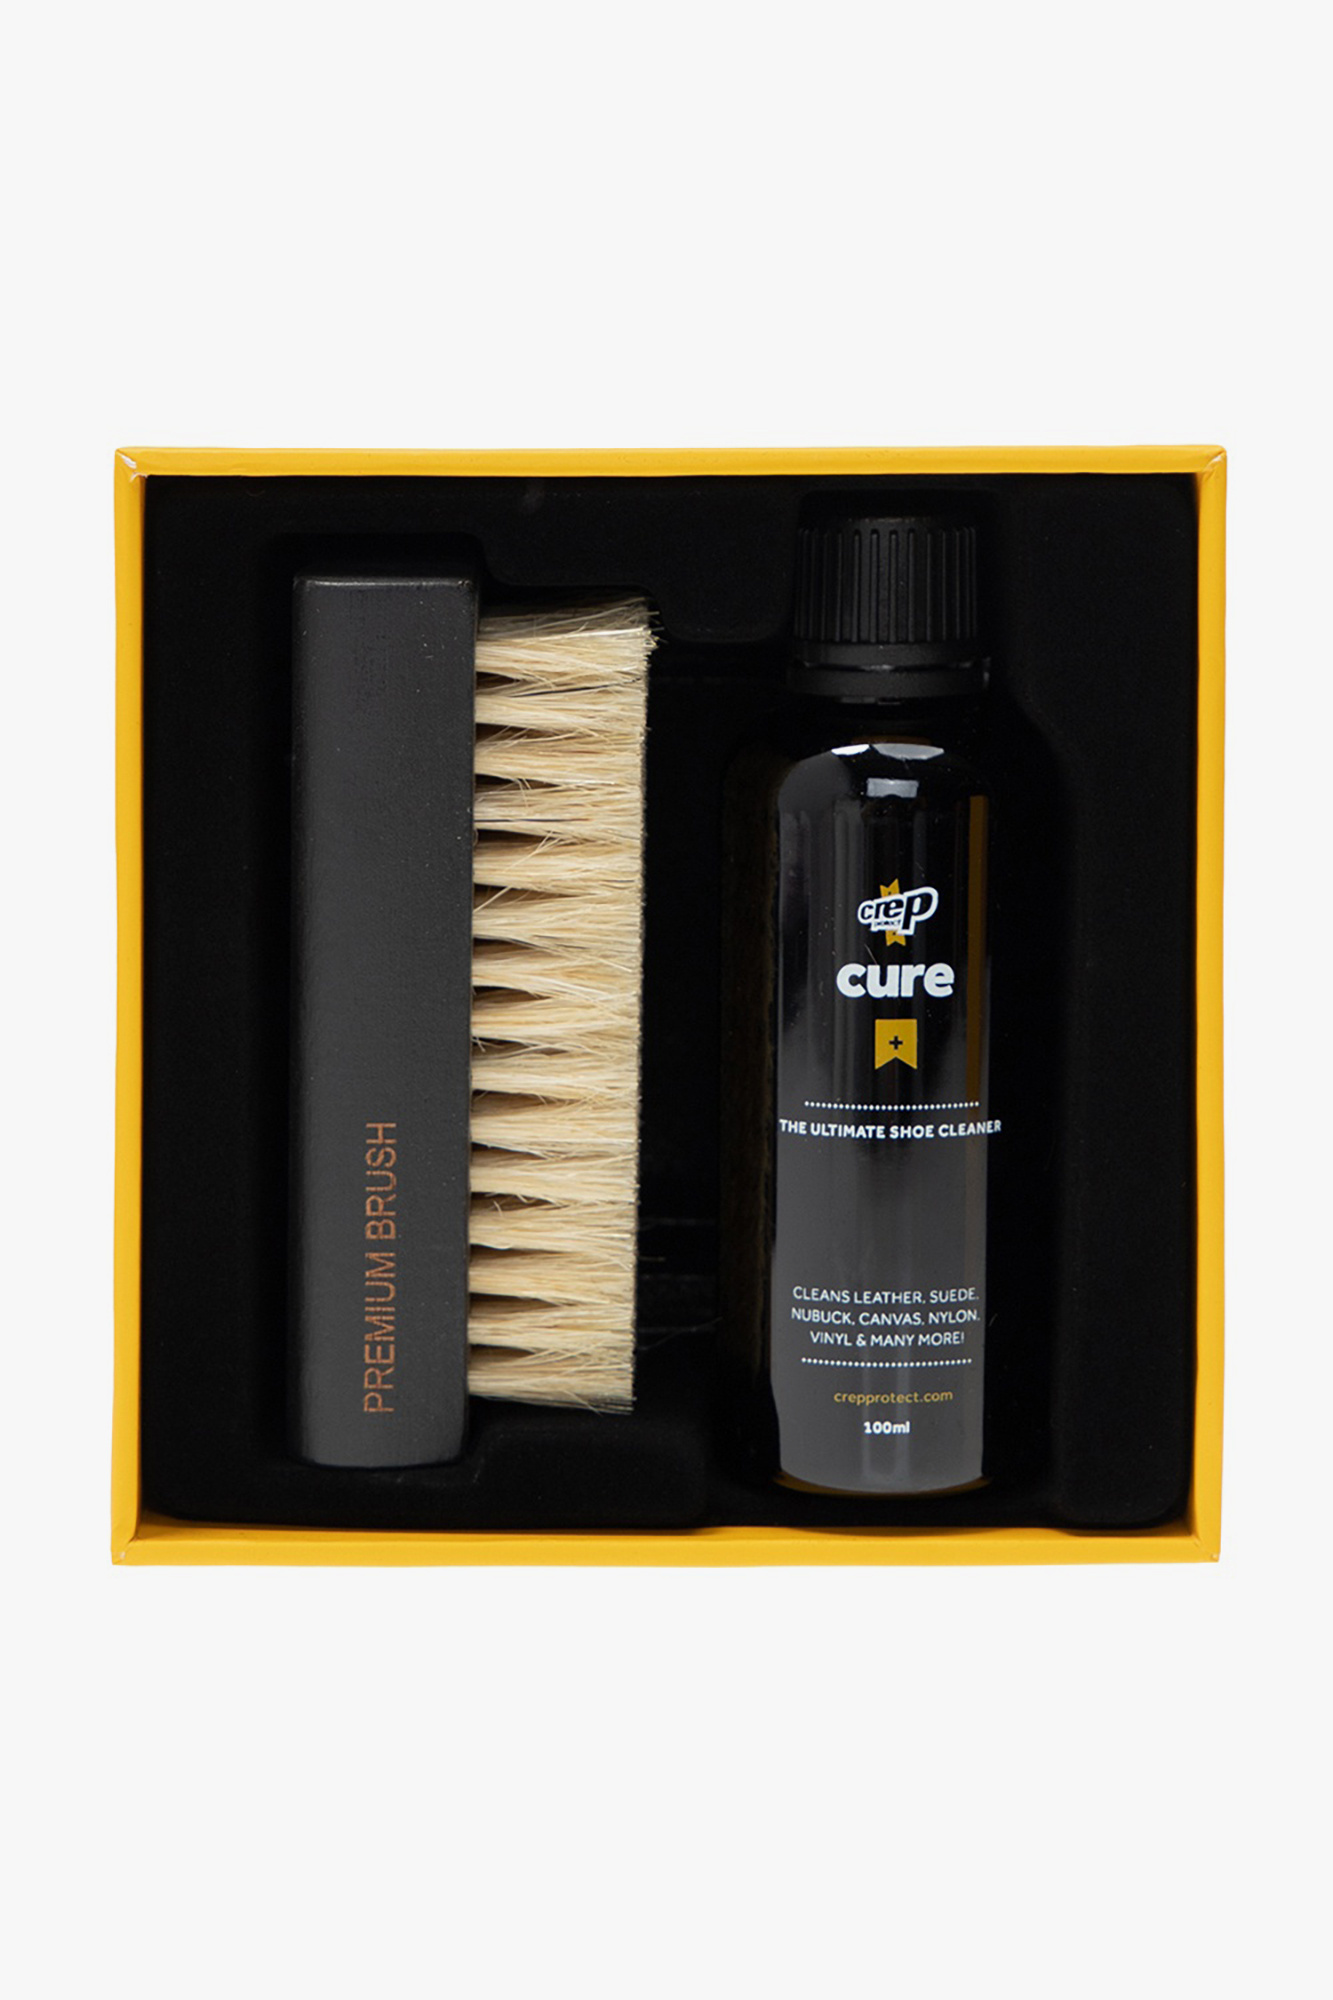 Crep Protect ‘Ultimate Box’ shoe Schuhe cleaning kit